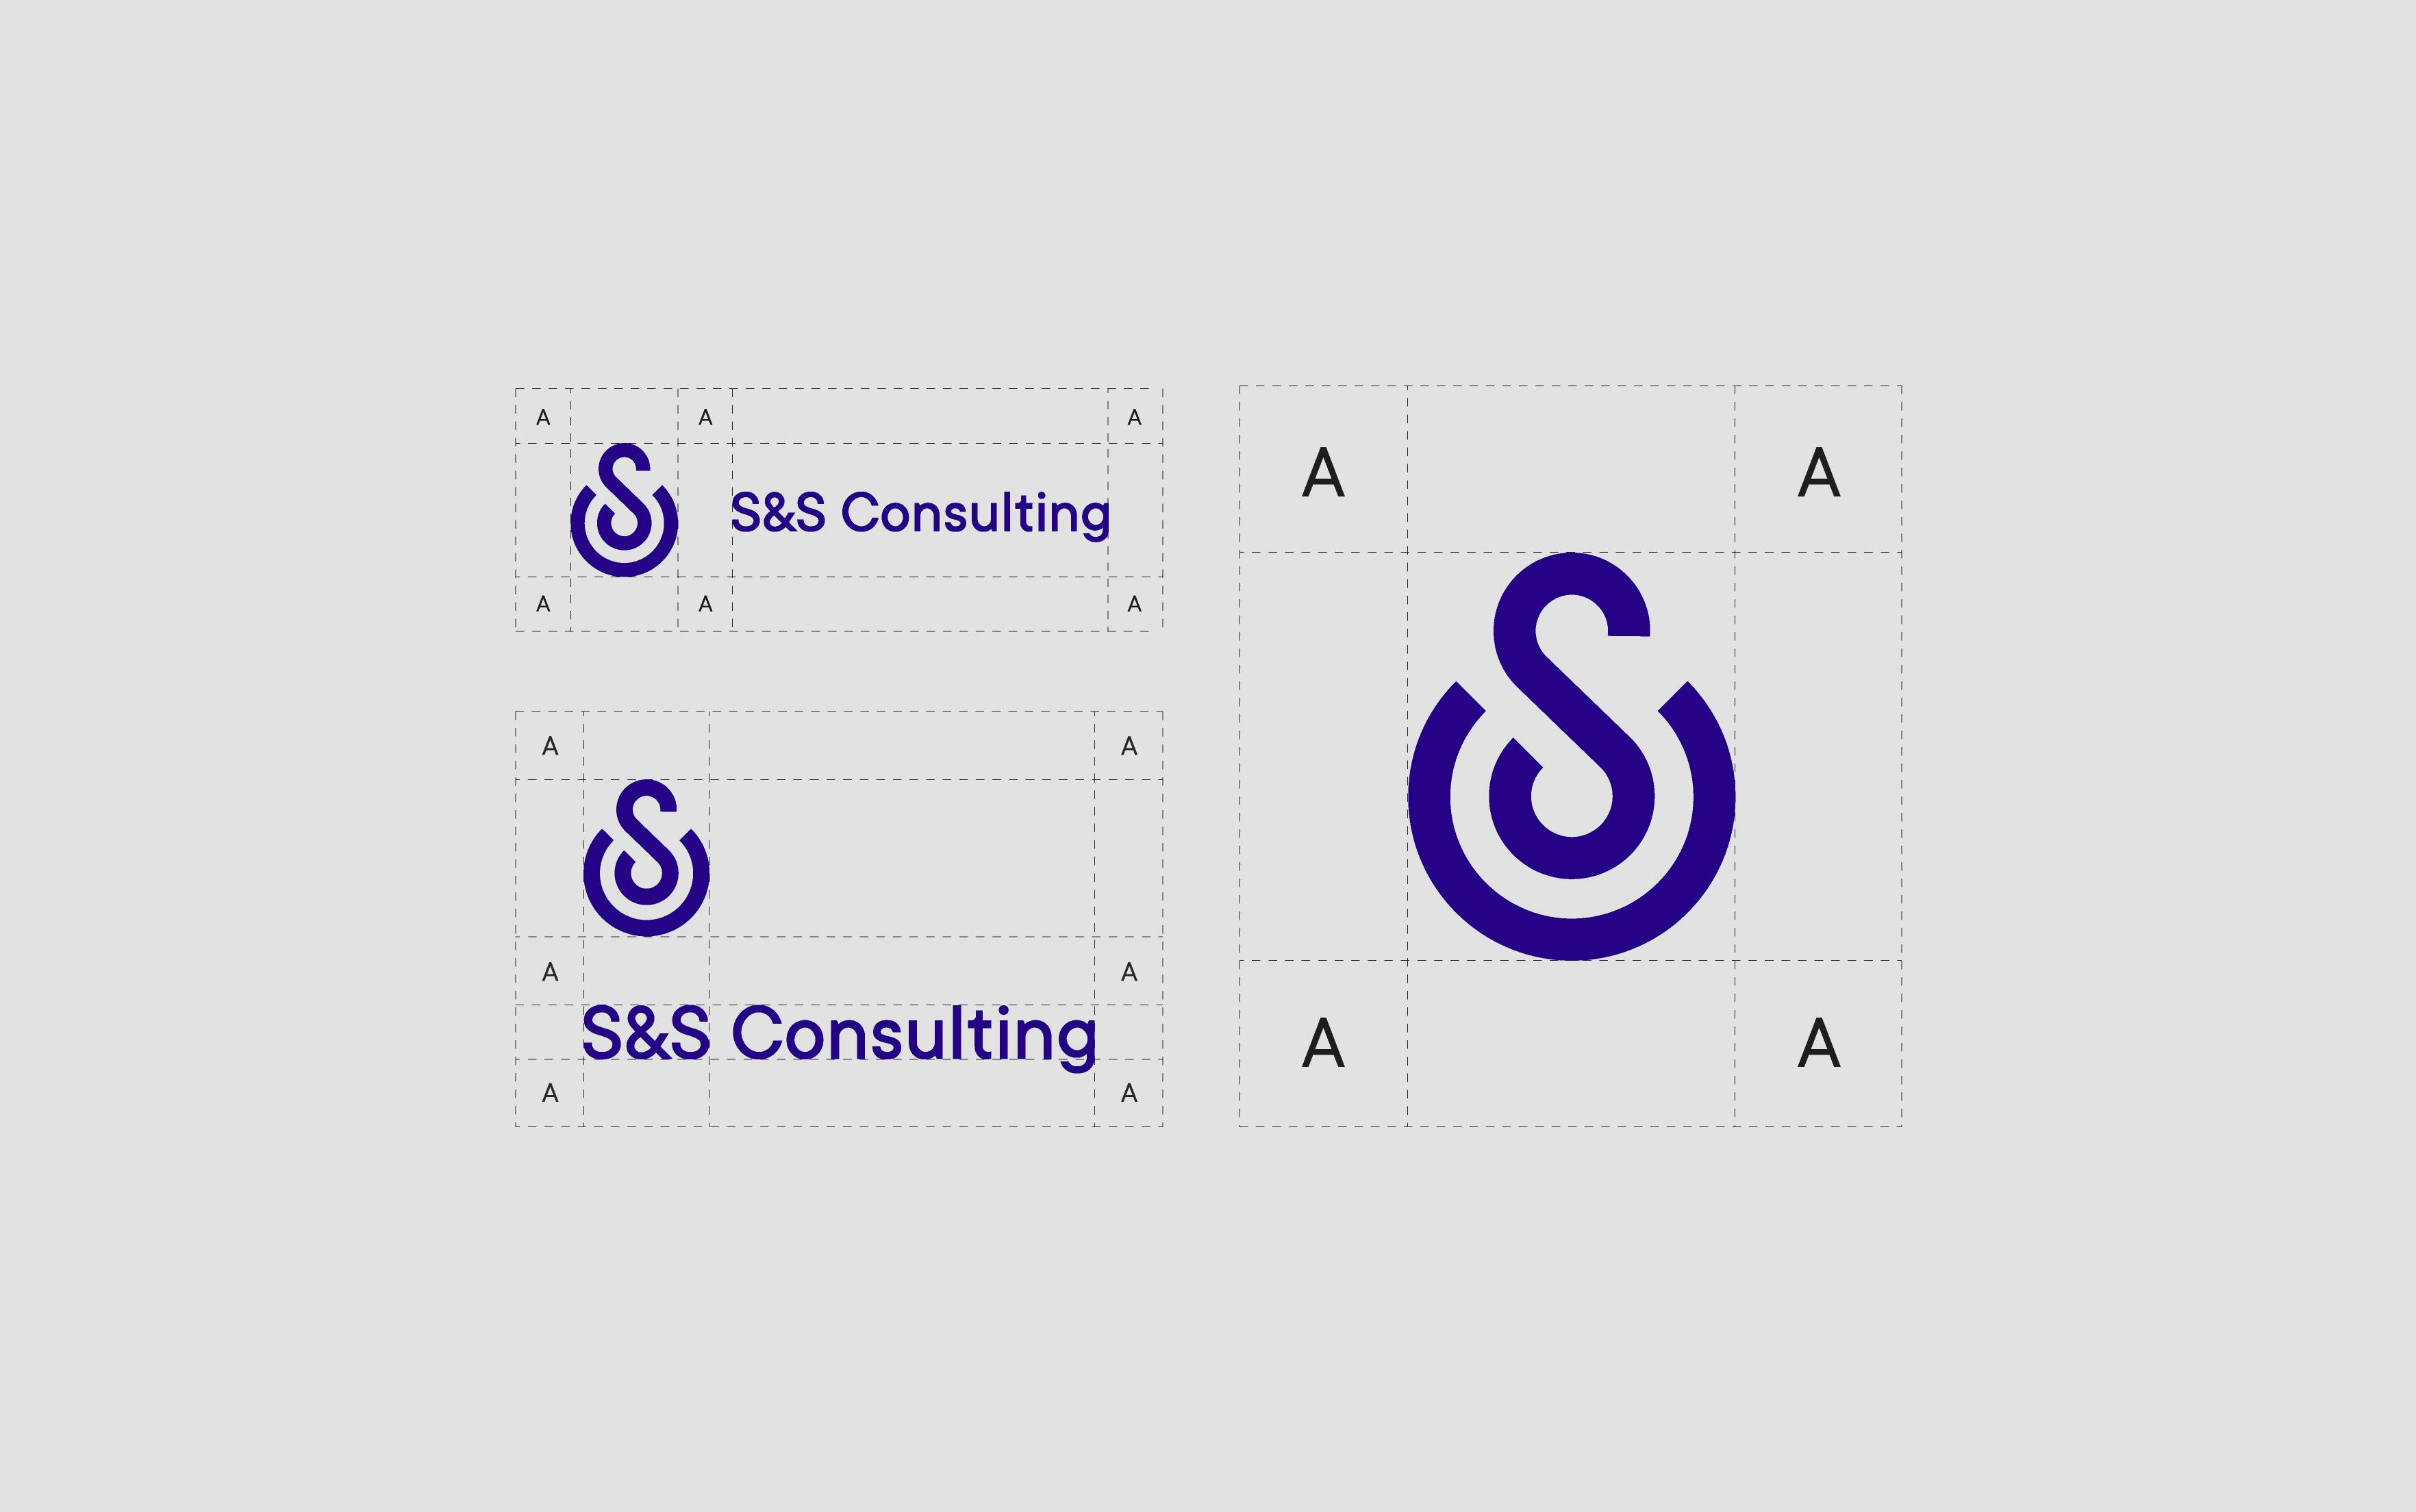 https://site.no11.ee/wp-content/uploads/2019/04/No11_SS-Consulting_logo-design-2.jpg